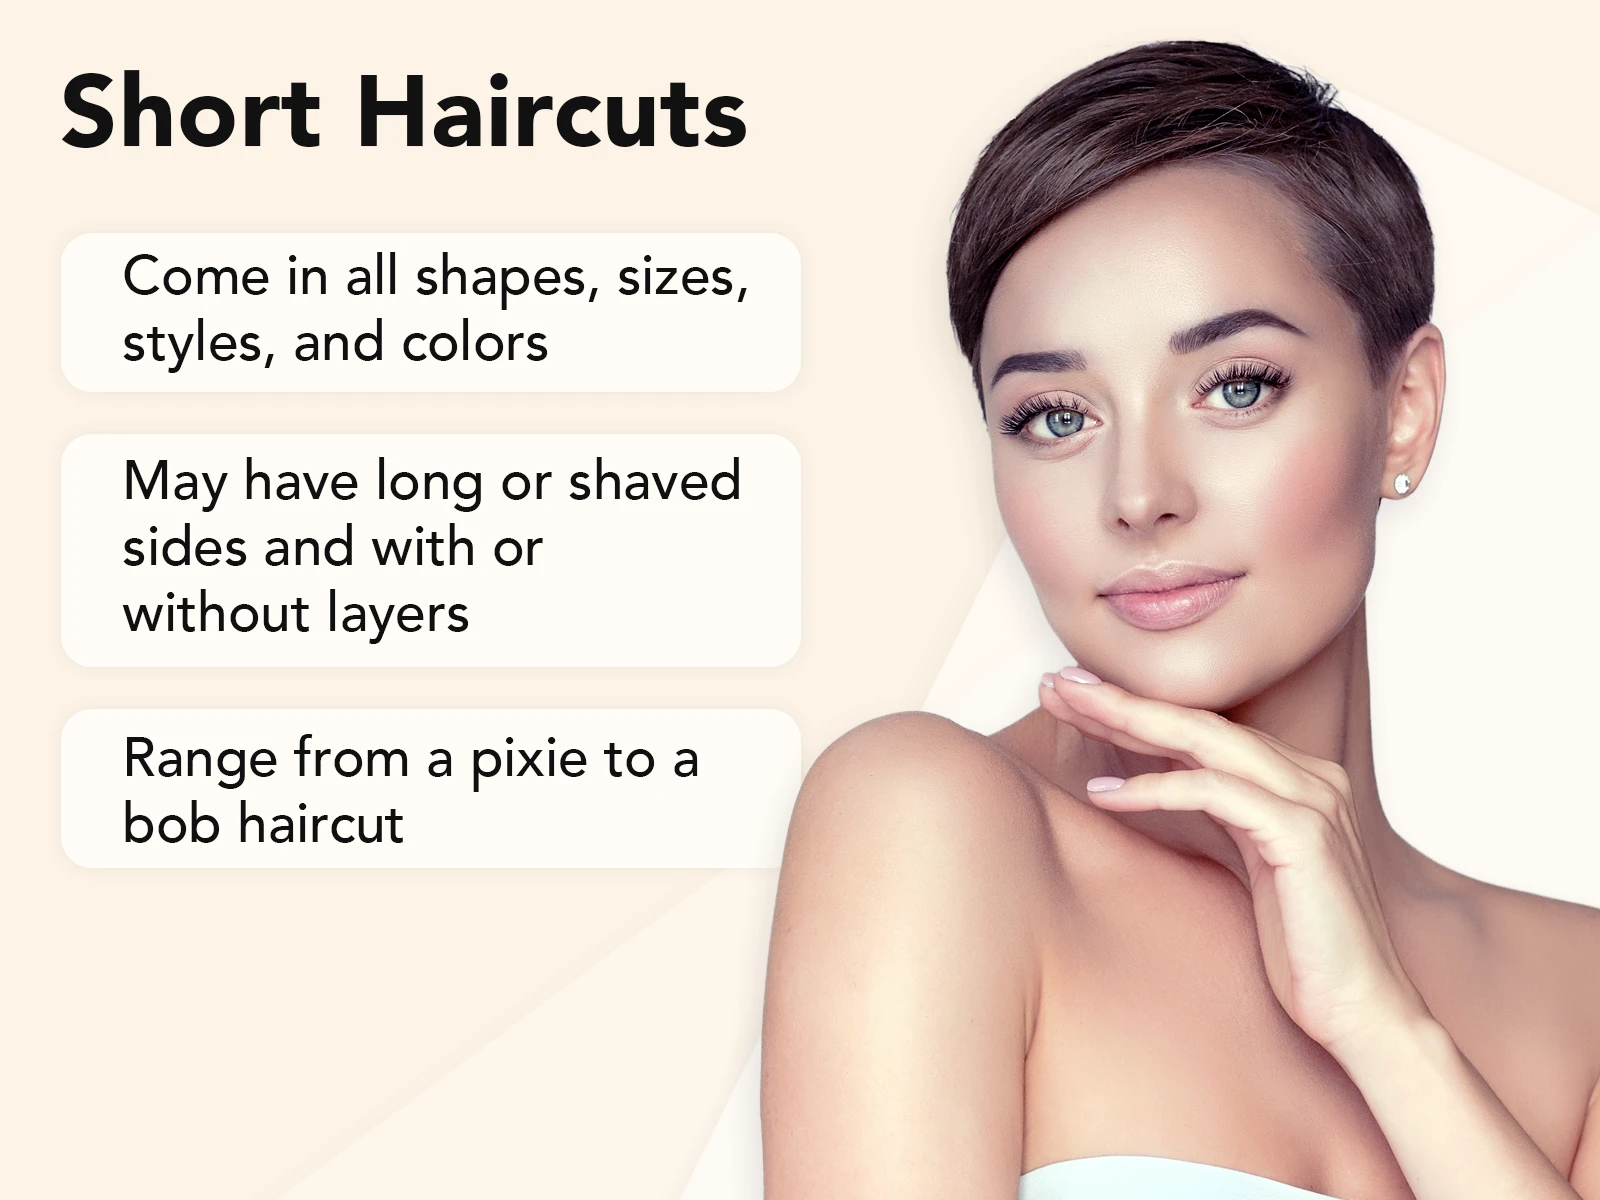 Short Haircuts for Women explainer image on a tan background